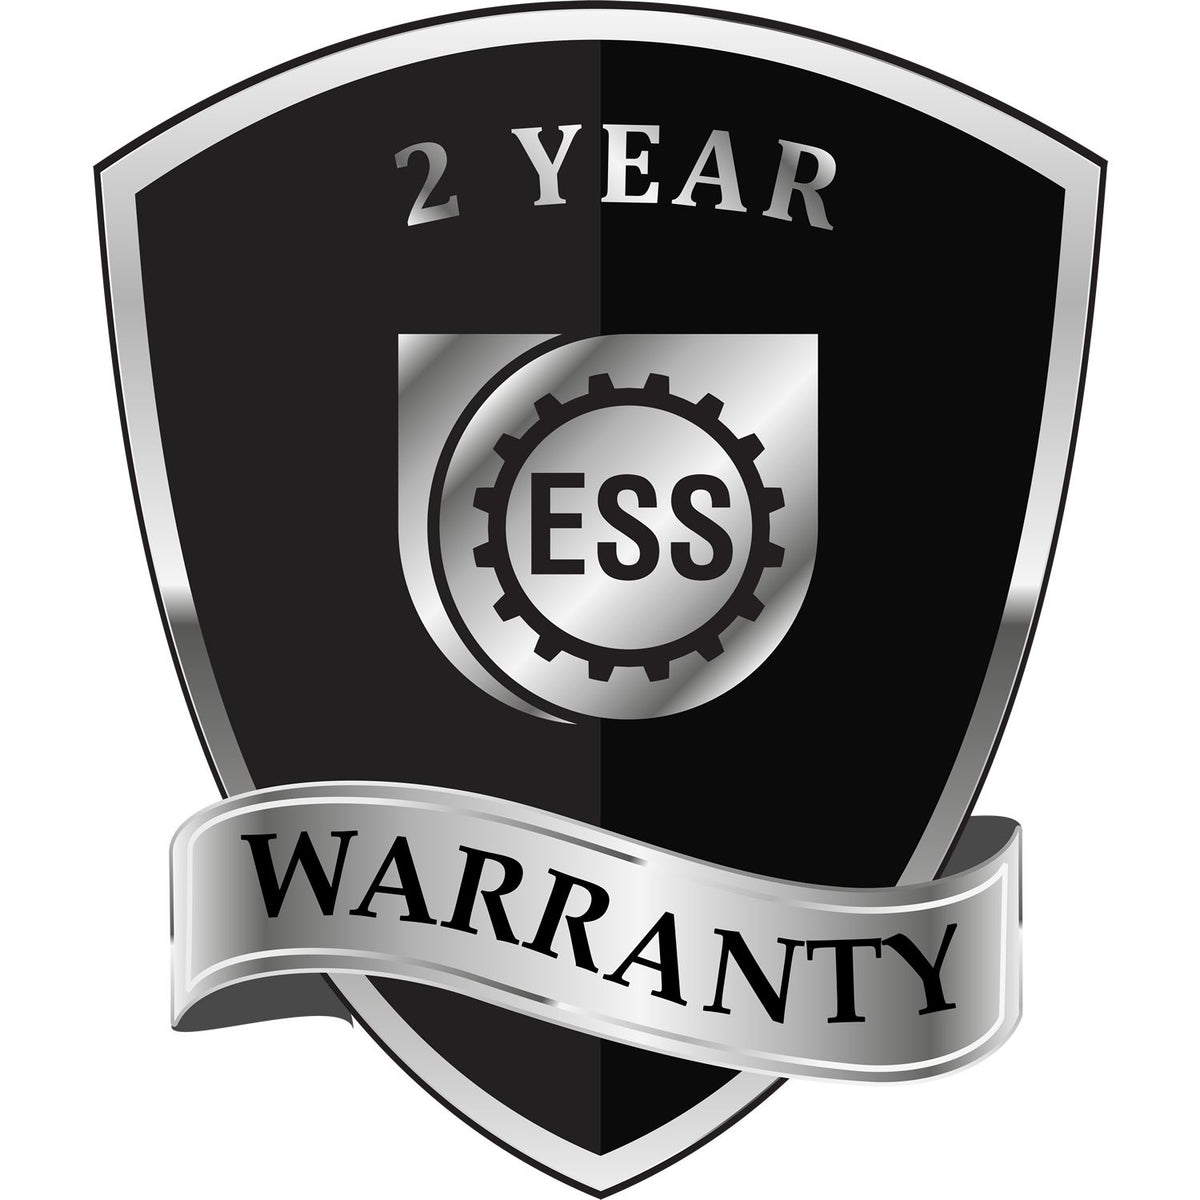 A badge or emblem showing a warranty icon for the Long Reach New Jersey PE Seal